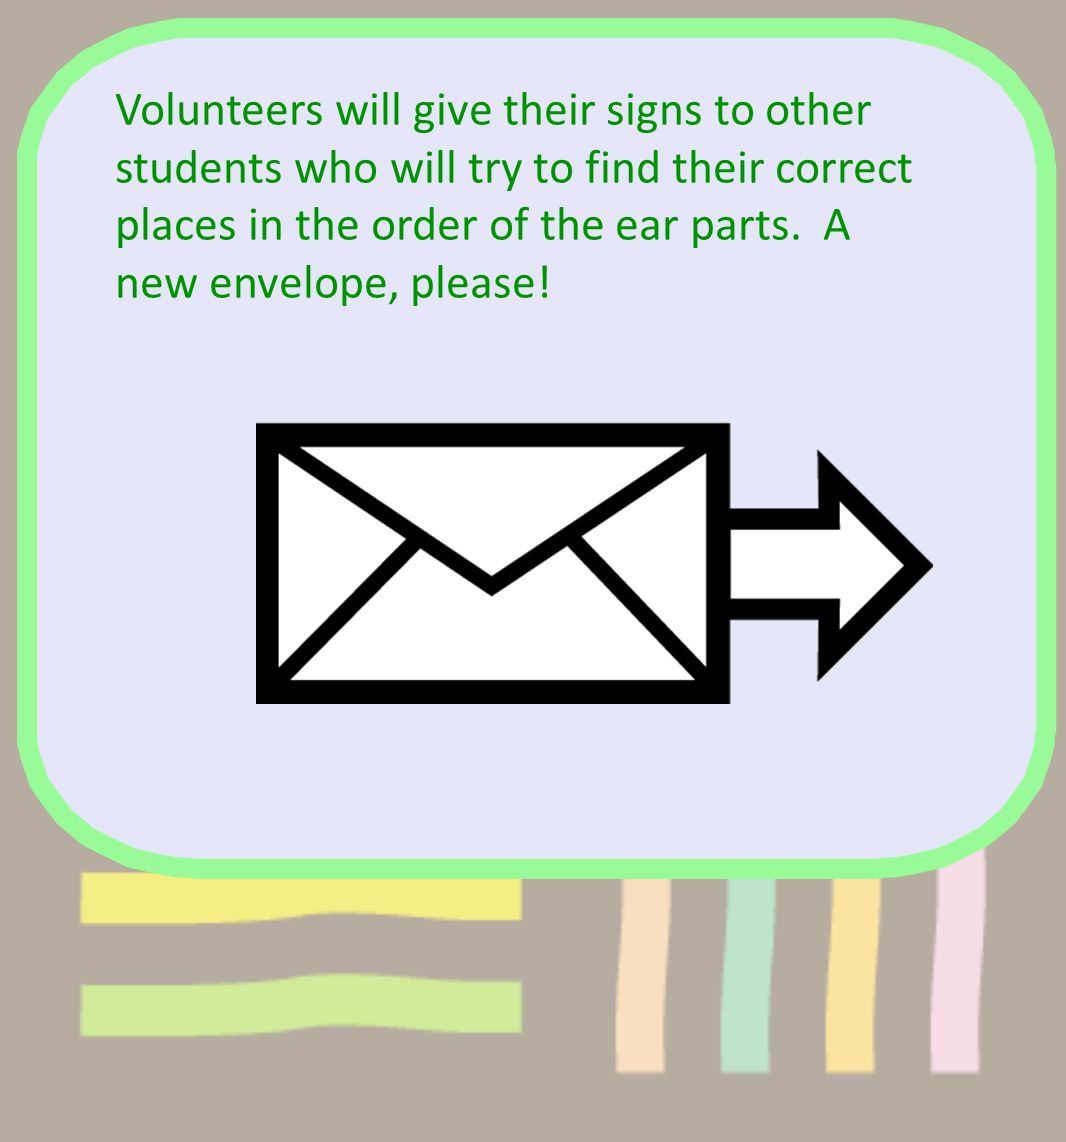 Volunteers will give their signs to other students who will try to find their correct places in the order of the ear parts.